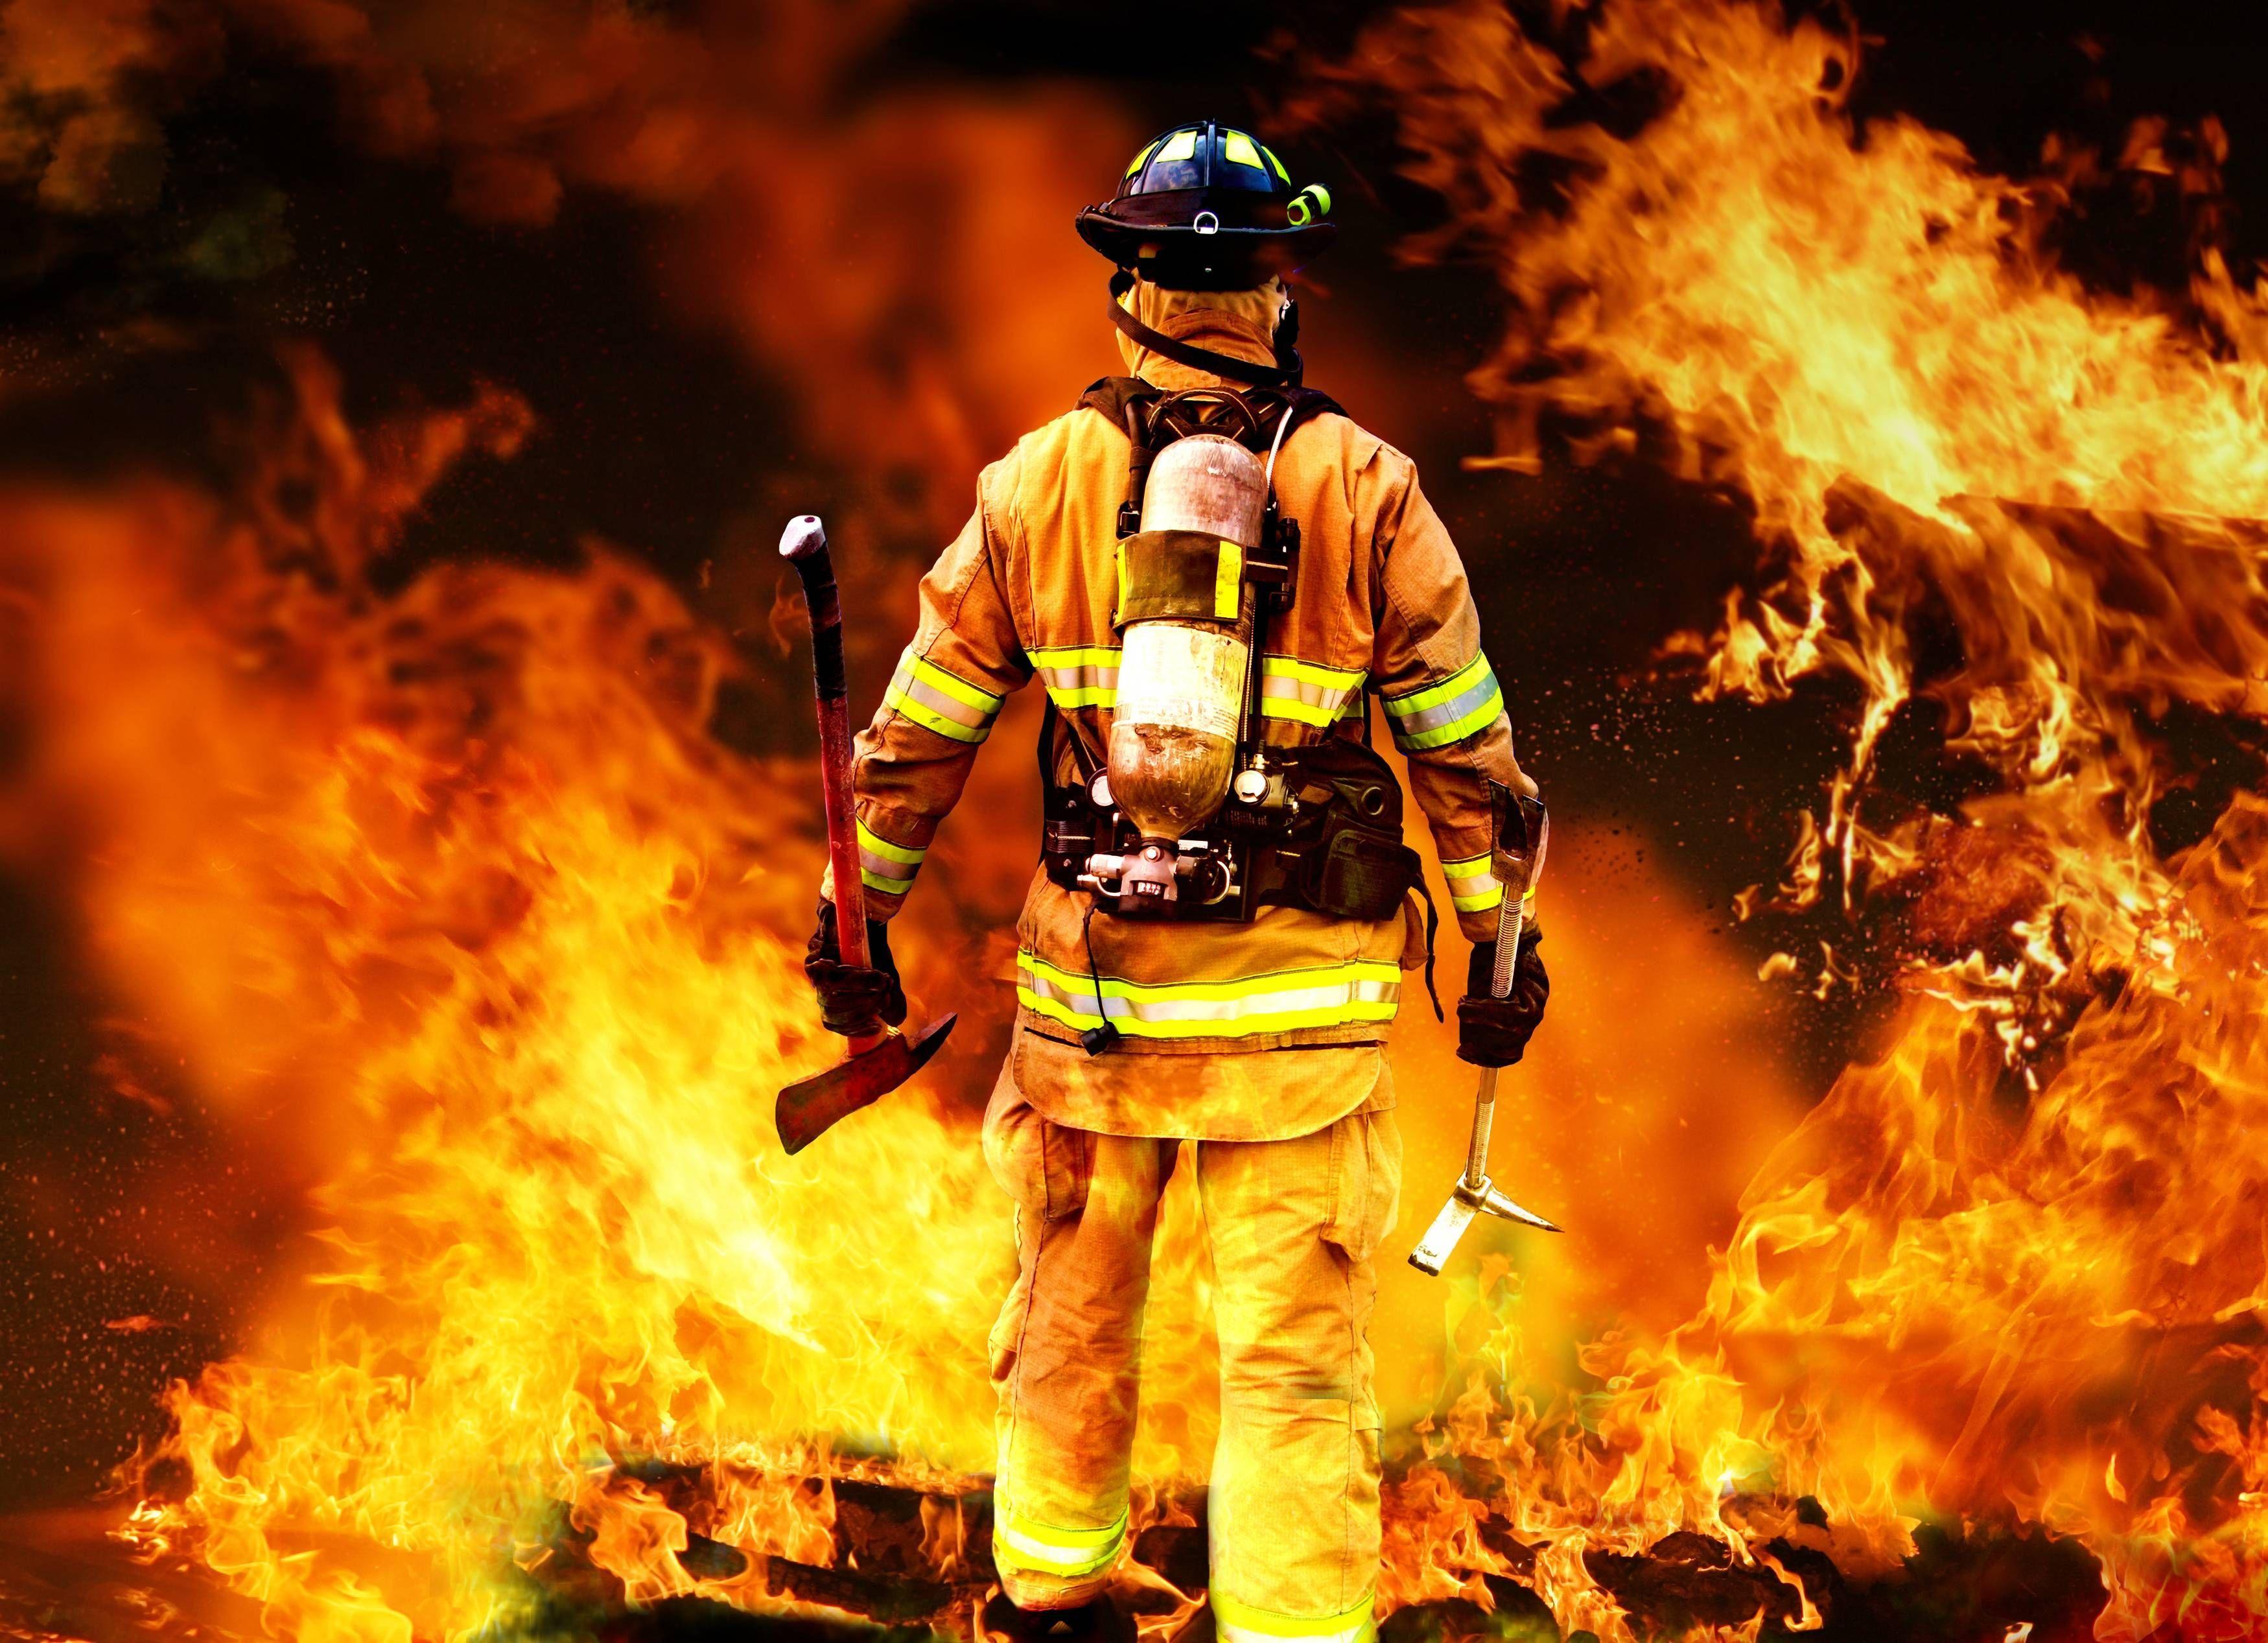 Free Firefighter Wallpaper for Phone. Image